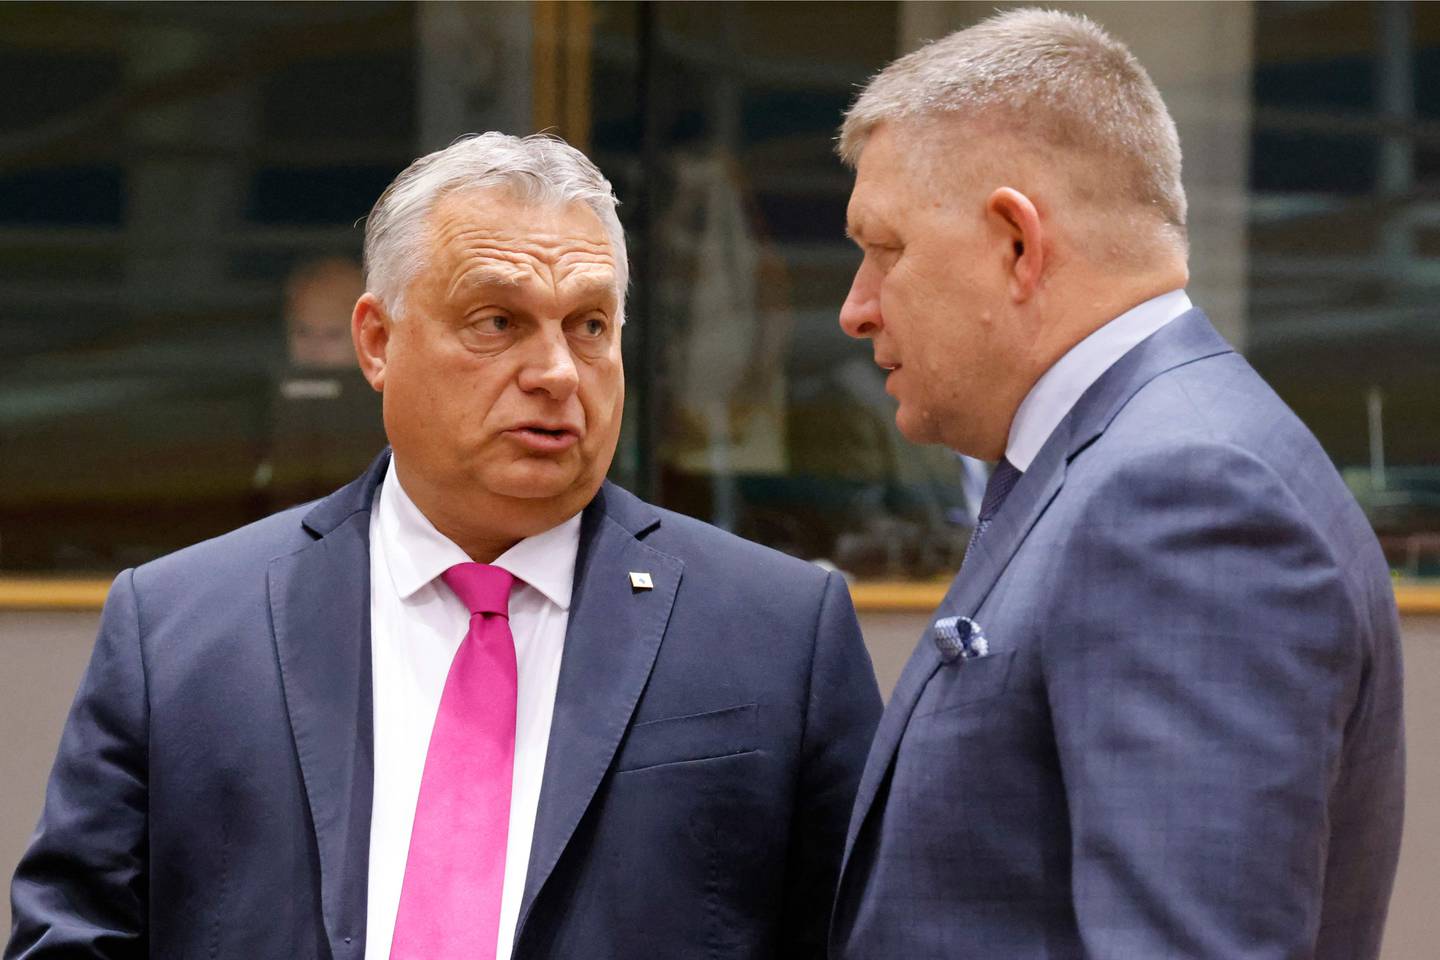 Hungary's Prime Minister Viktor Orban (L) speaks with Slovakia's Prime Minister Robert Fico prior to the start of a EU leaders Summit at The European Council Building in Brussels on October 26, 2023. EU leaders will debate starting October 26, 2023, in a two day summit in Brussels, for a call for humanitarian "pauses" in Israel's war with Hamas, as the bloc grapples with another conflict on its fringes alongside Russia's invasion of Ukraine. (Photo by Ludovic MARIN / AFP)